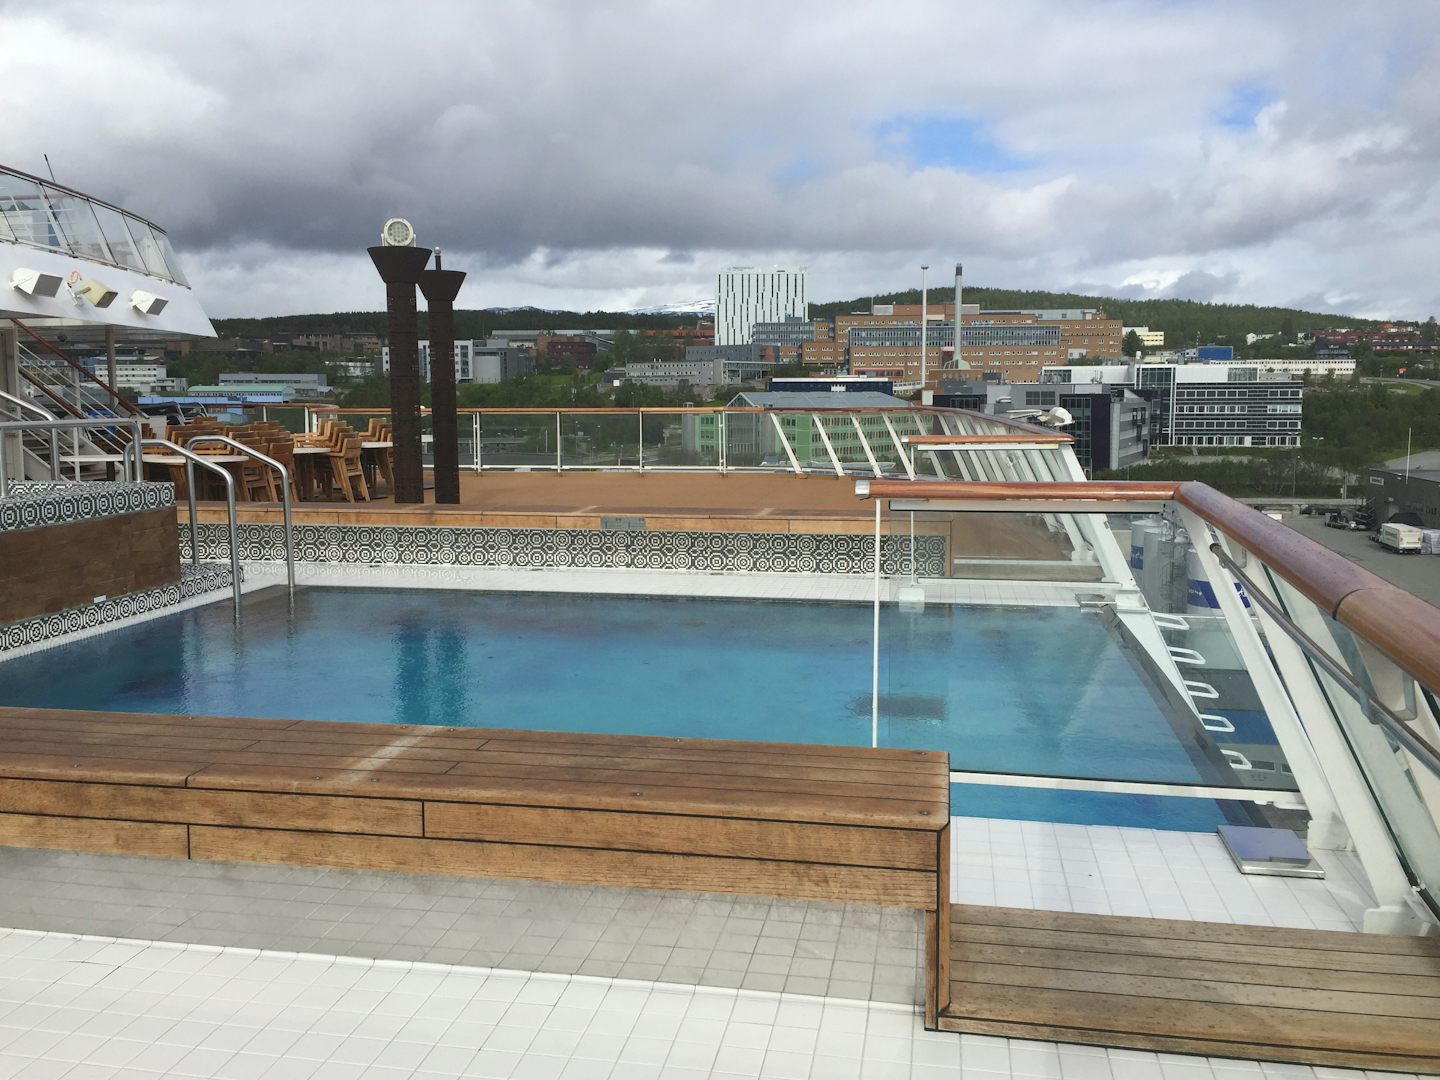 The Infinity Pool on back of ship